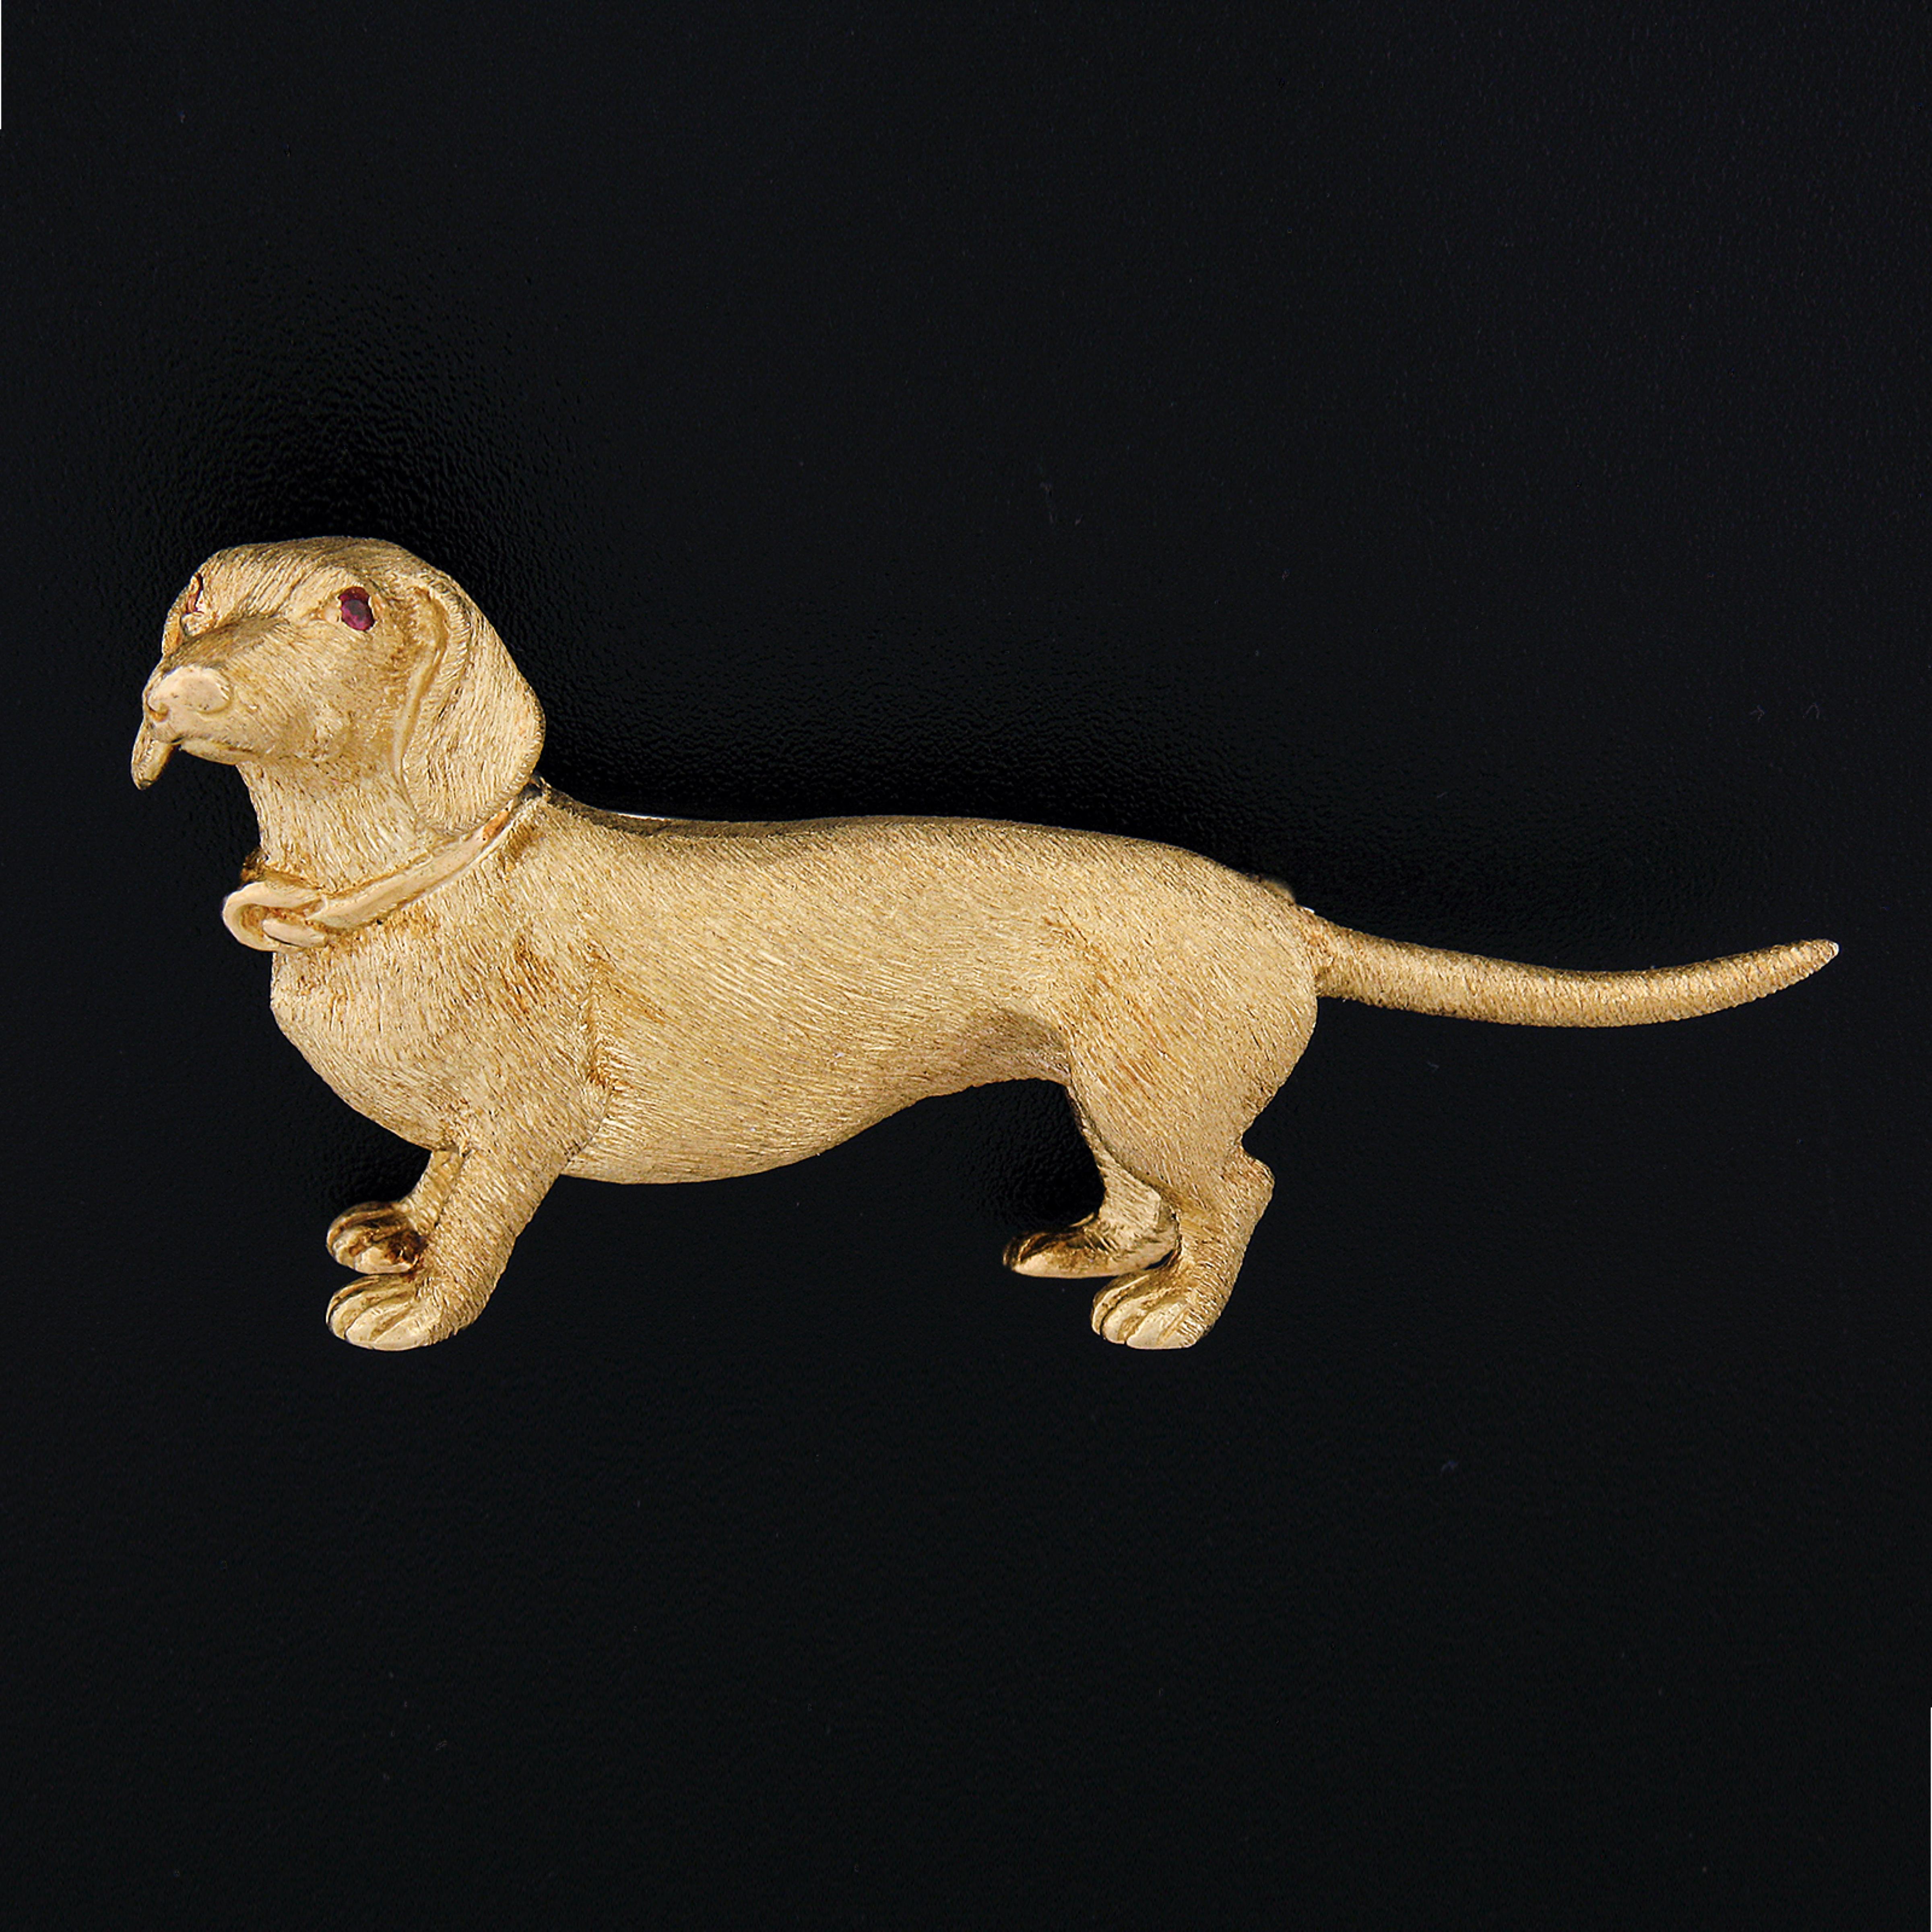 This incredible and very well made pin/brooch is crafted in solid 18k yellow gold. It features a perfectly structured standing dachshund dog design with remarkably outstanding workmanship and texture that bring out maximum detailing granting a truly